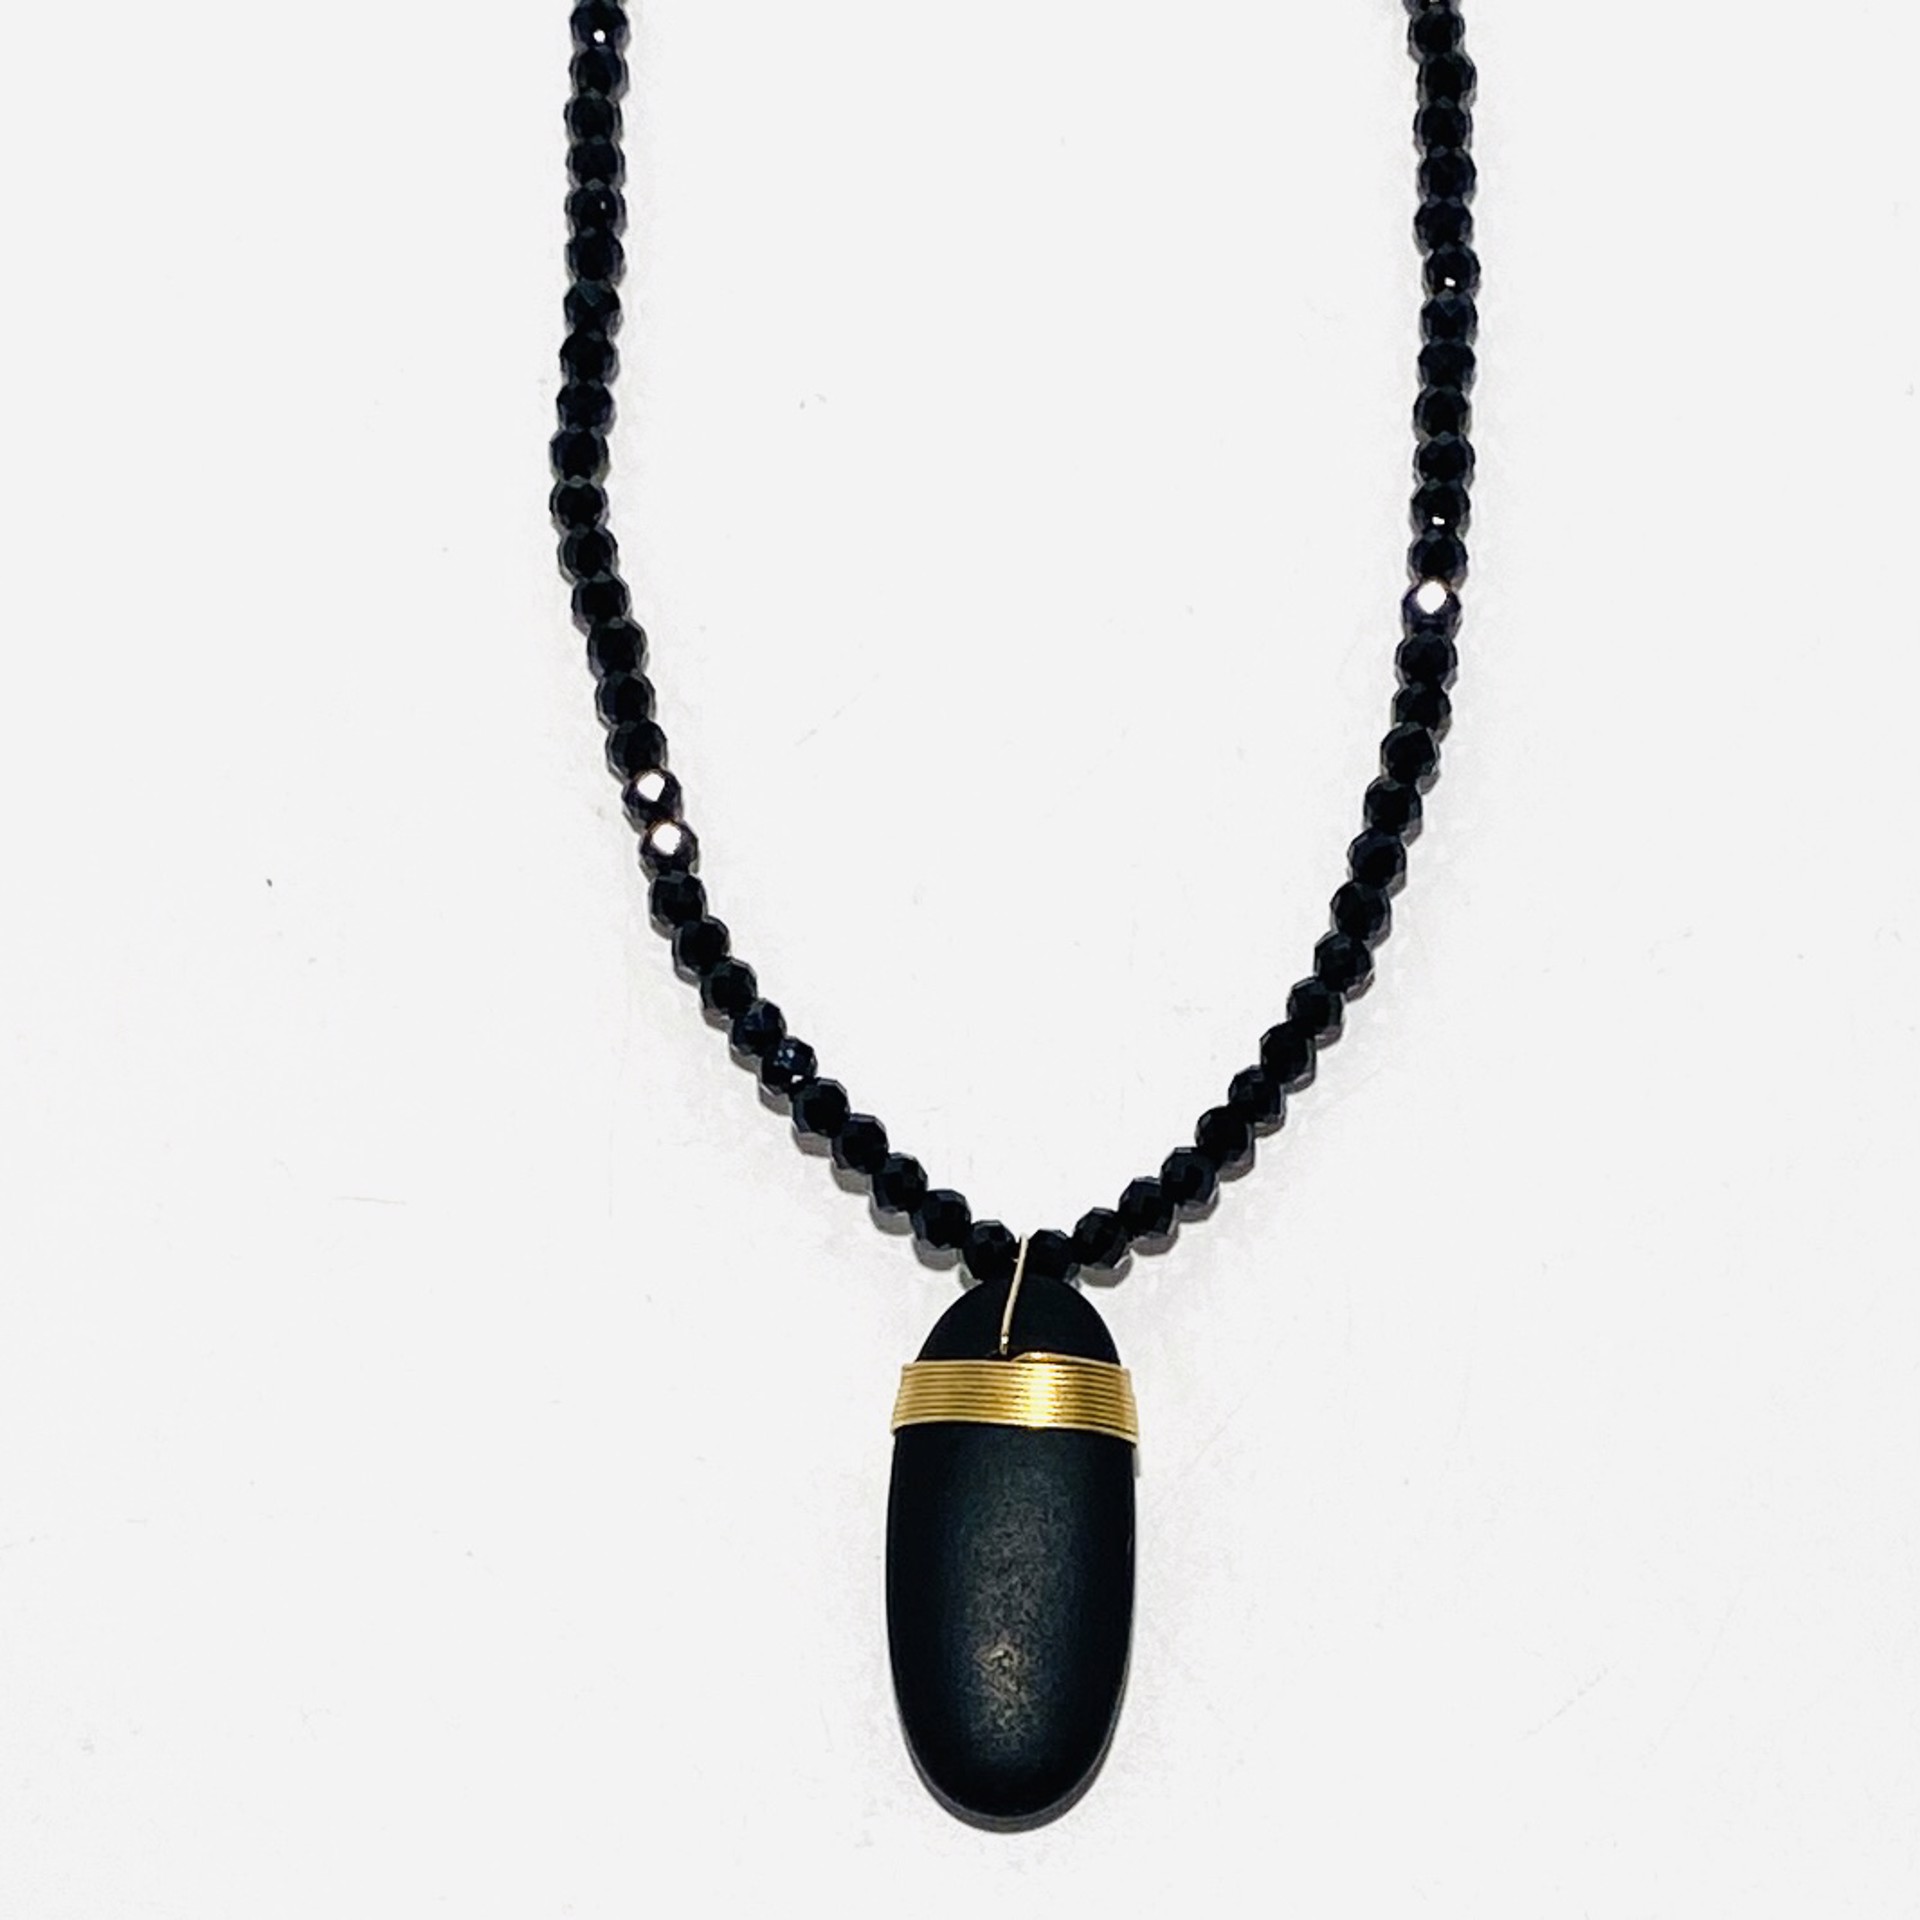 Faceted Black Spinel Oval River Stone Drop Necklace by Nance Trueworthy